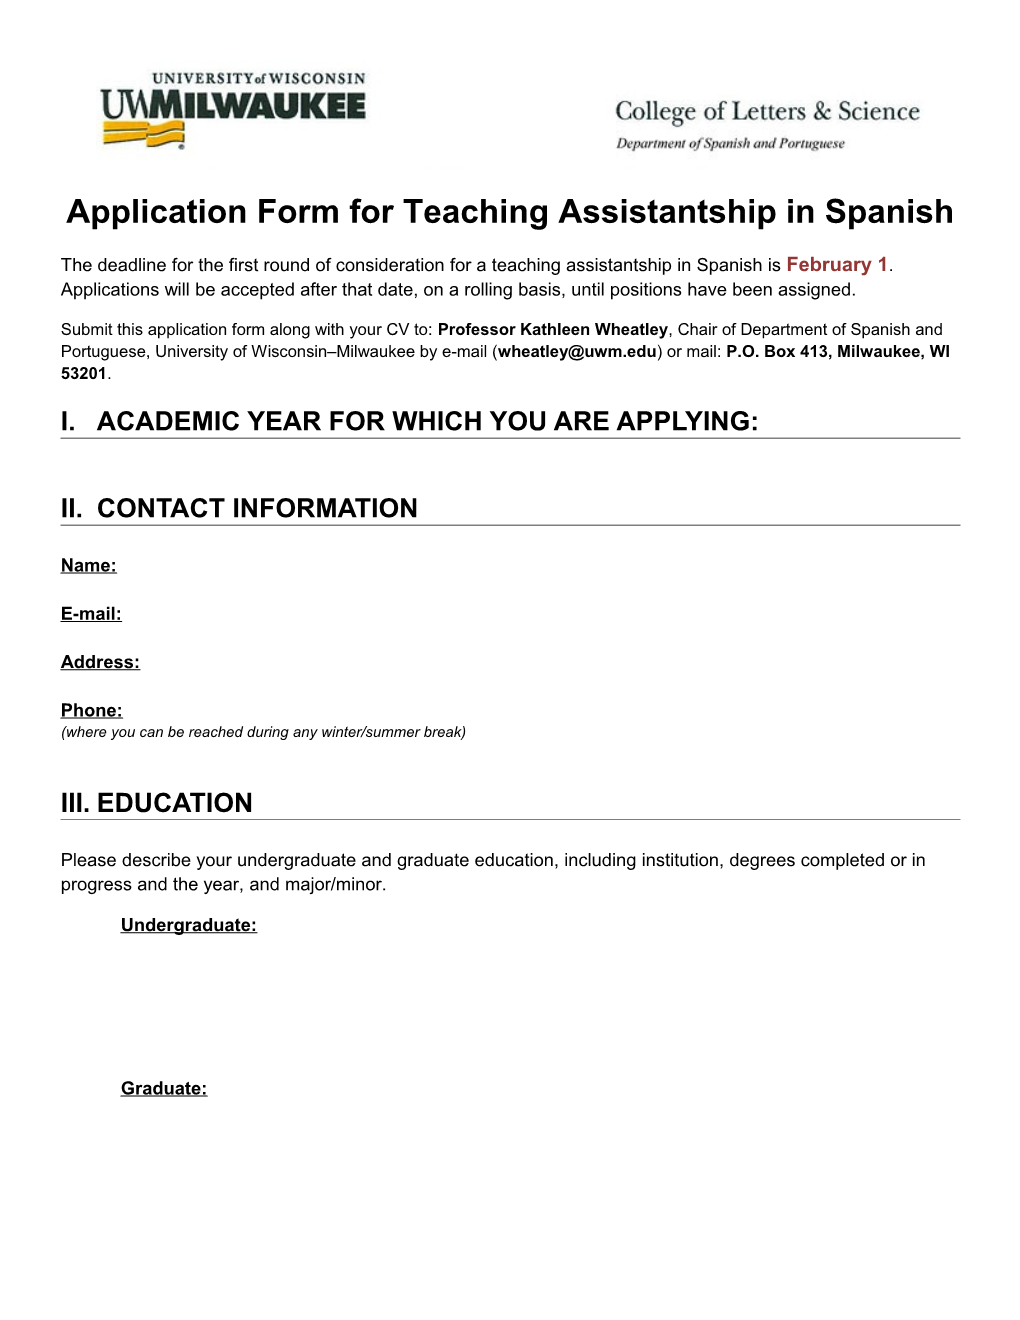 Application Form for Teaching Assistantship in Spanish